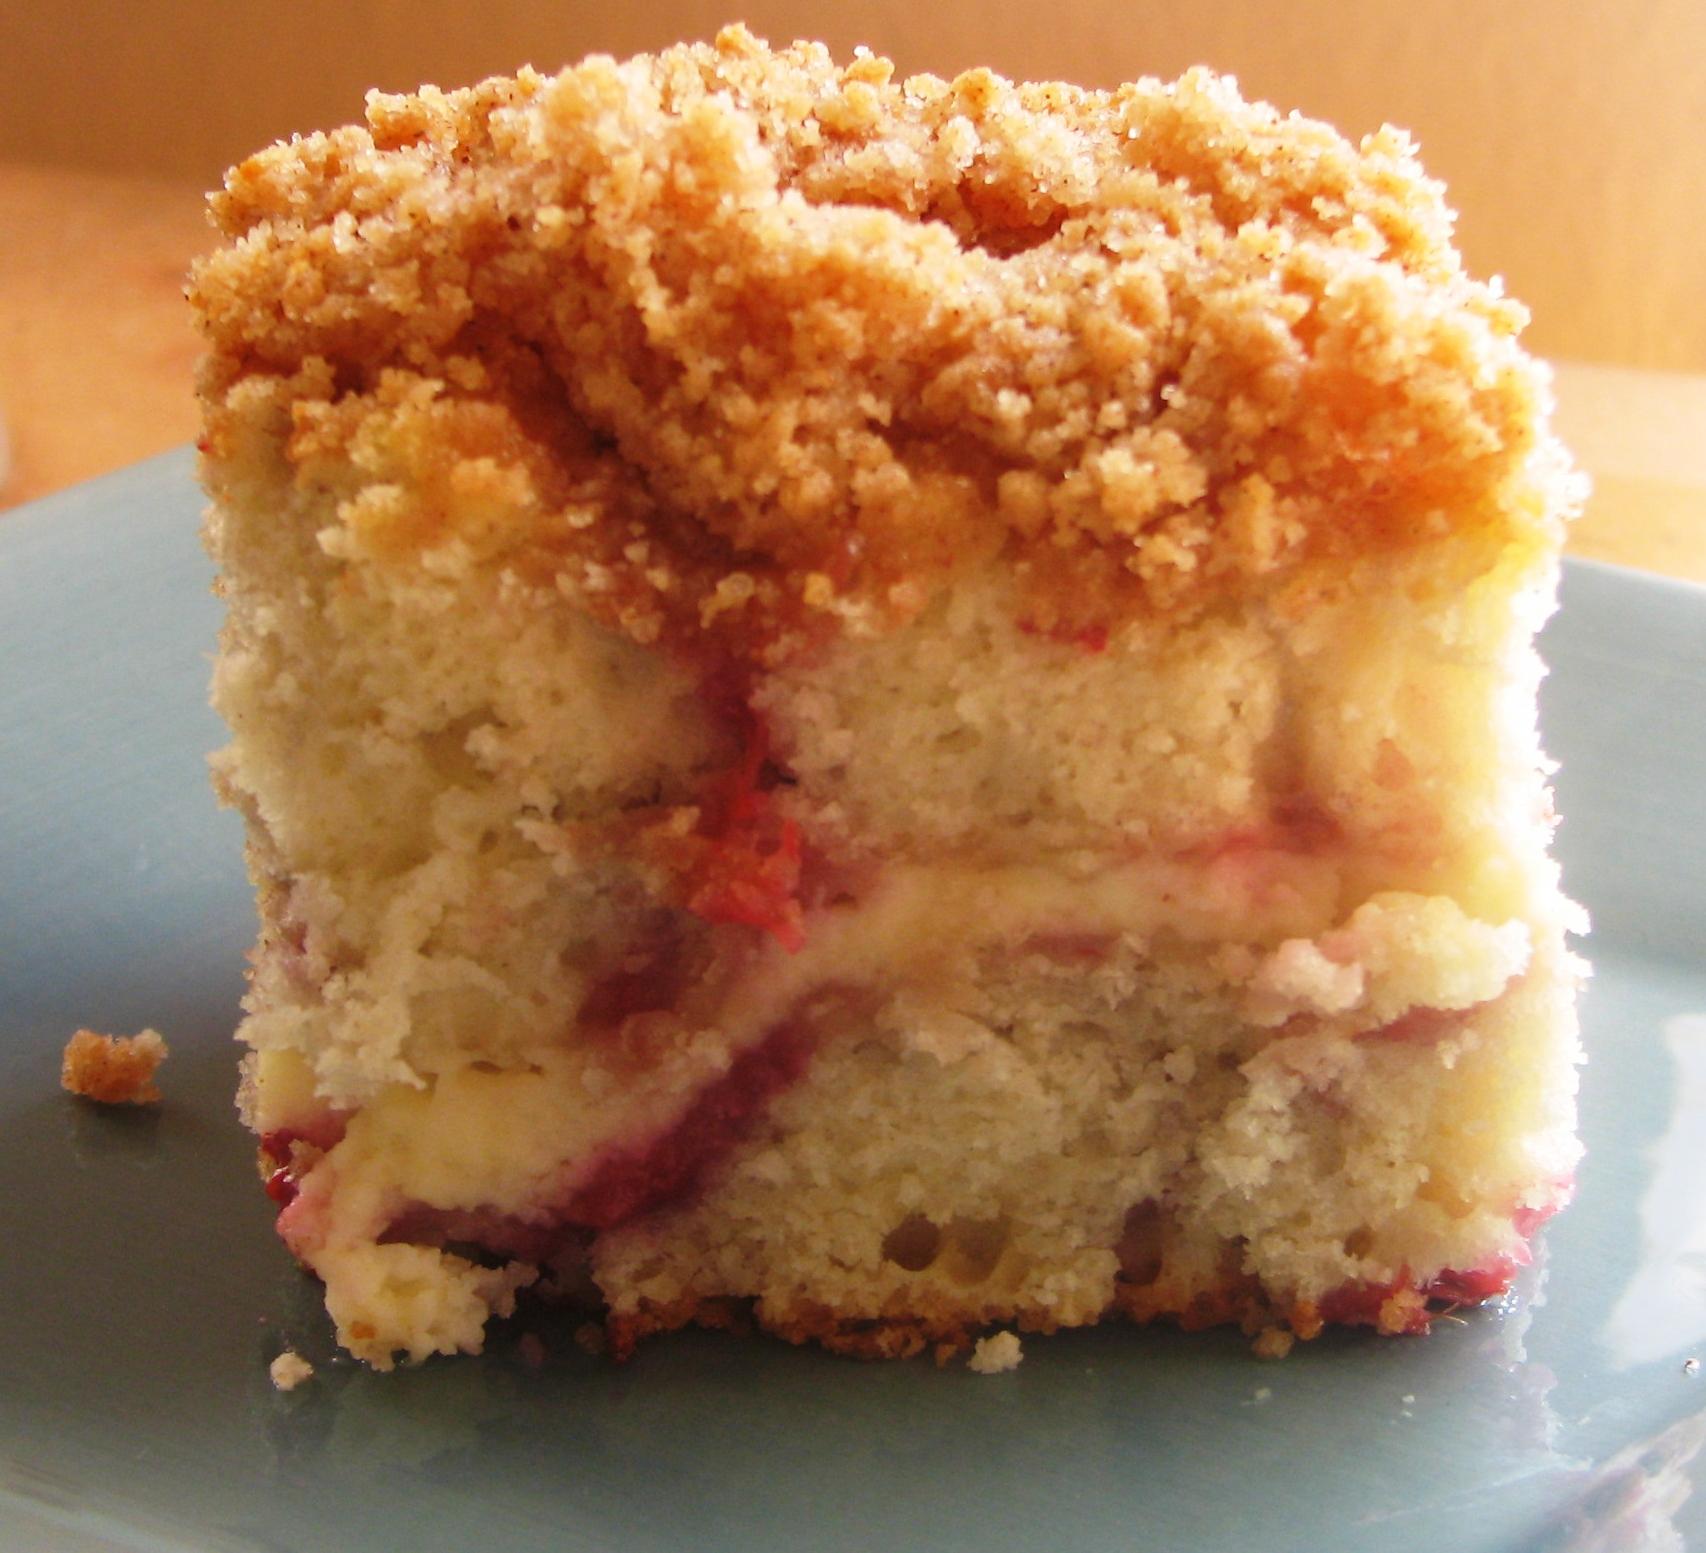  Start your day off on the sweet side with a slice of this raspberry cream cheese coffee cake.